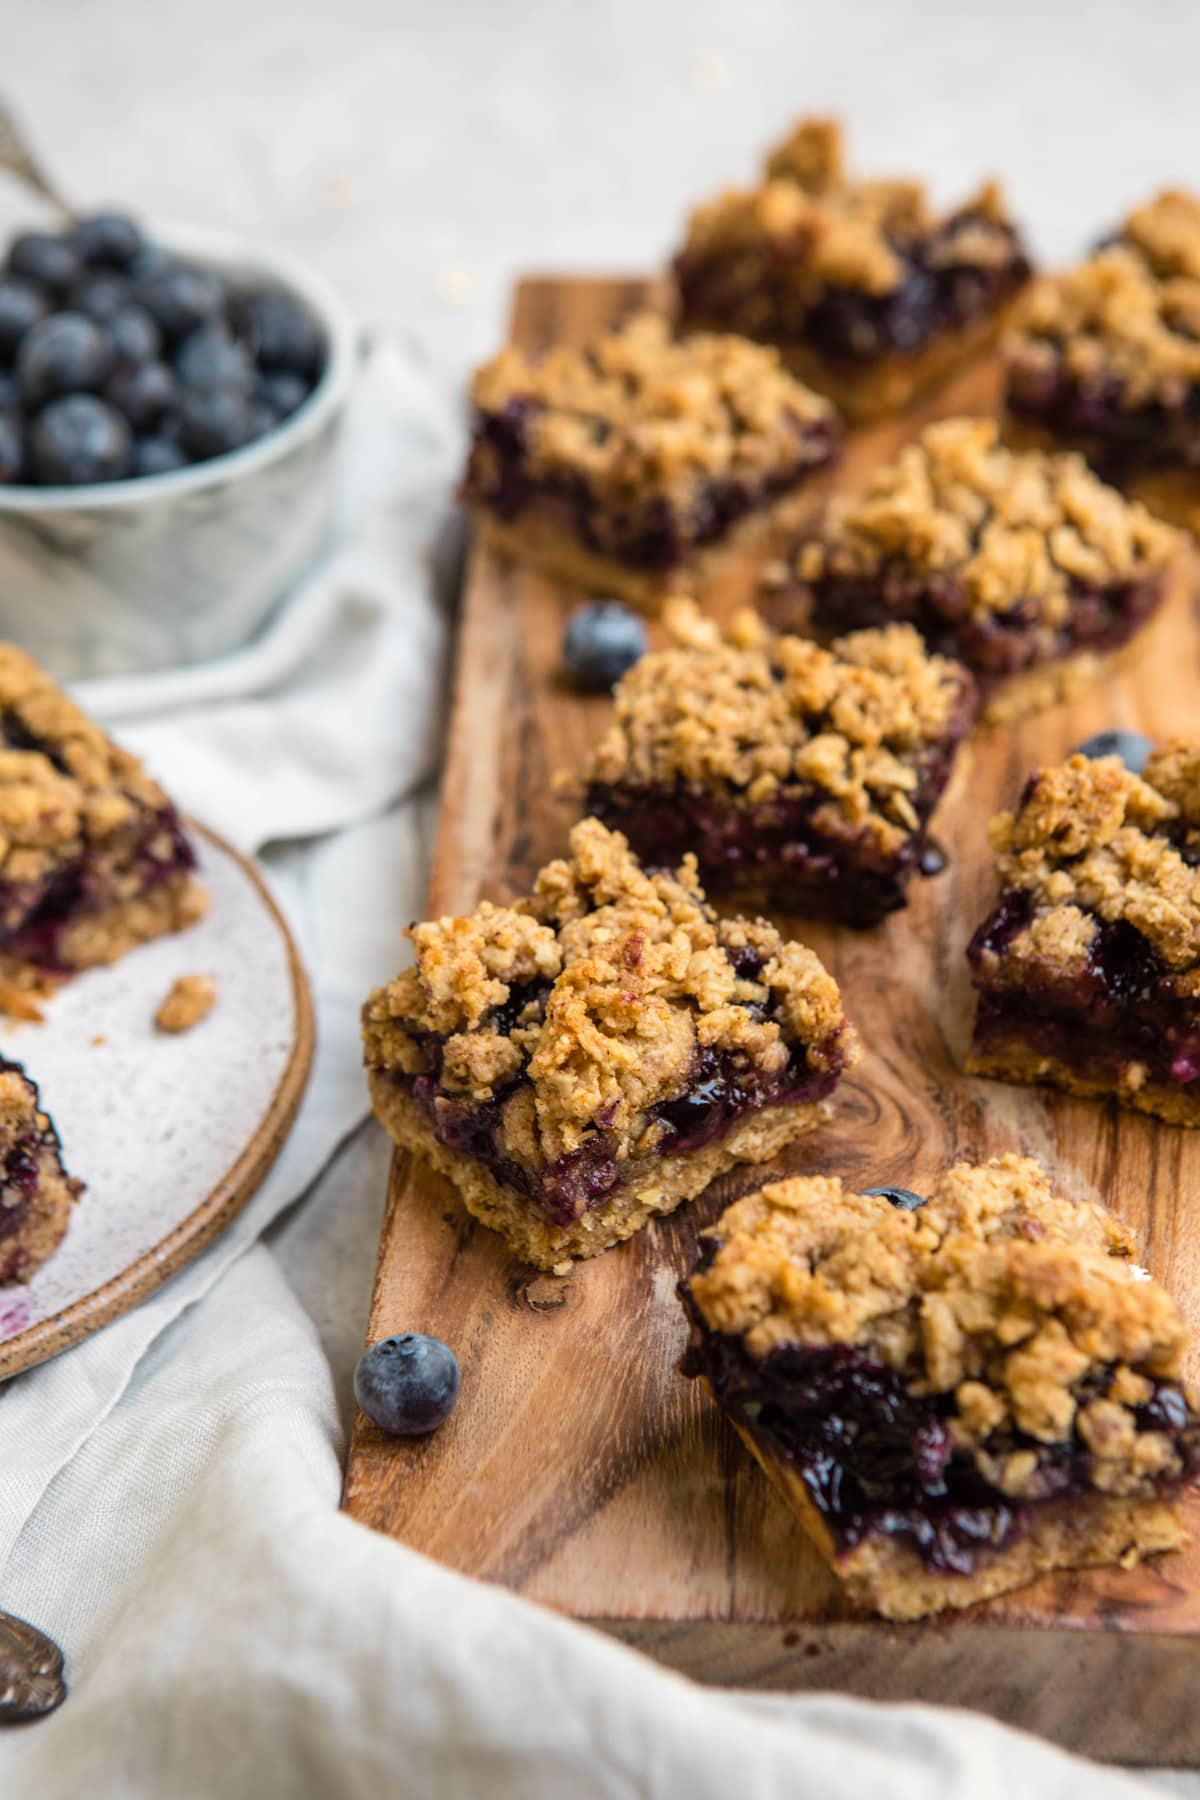 blueberry crumble bars on wooden cutting board with fresh blueberries